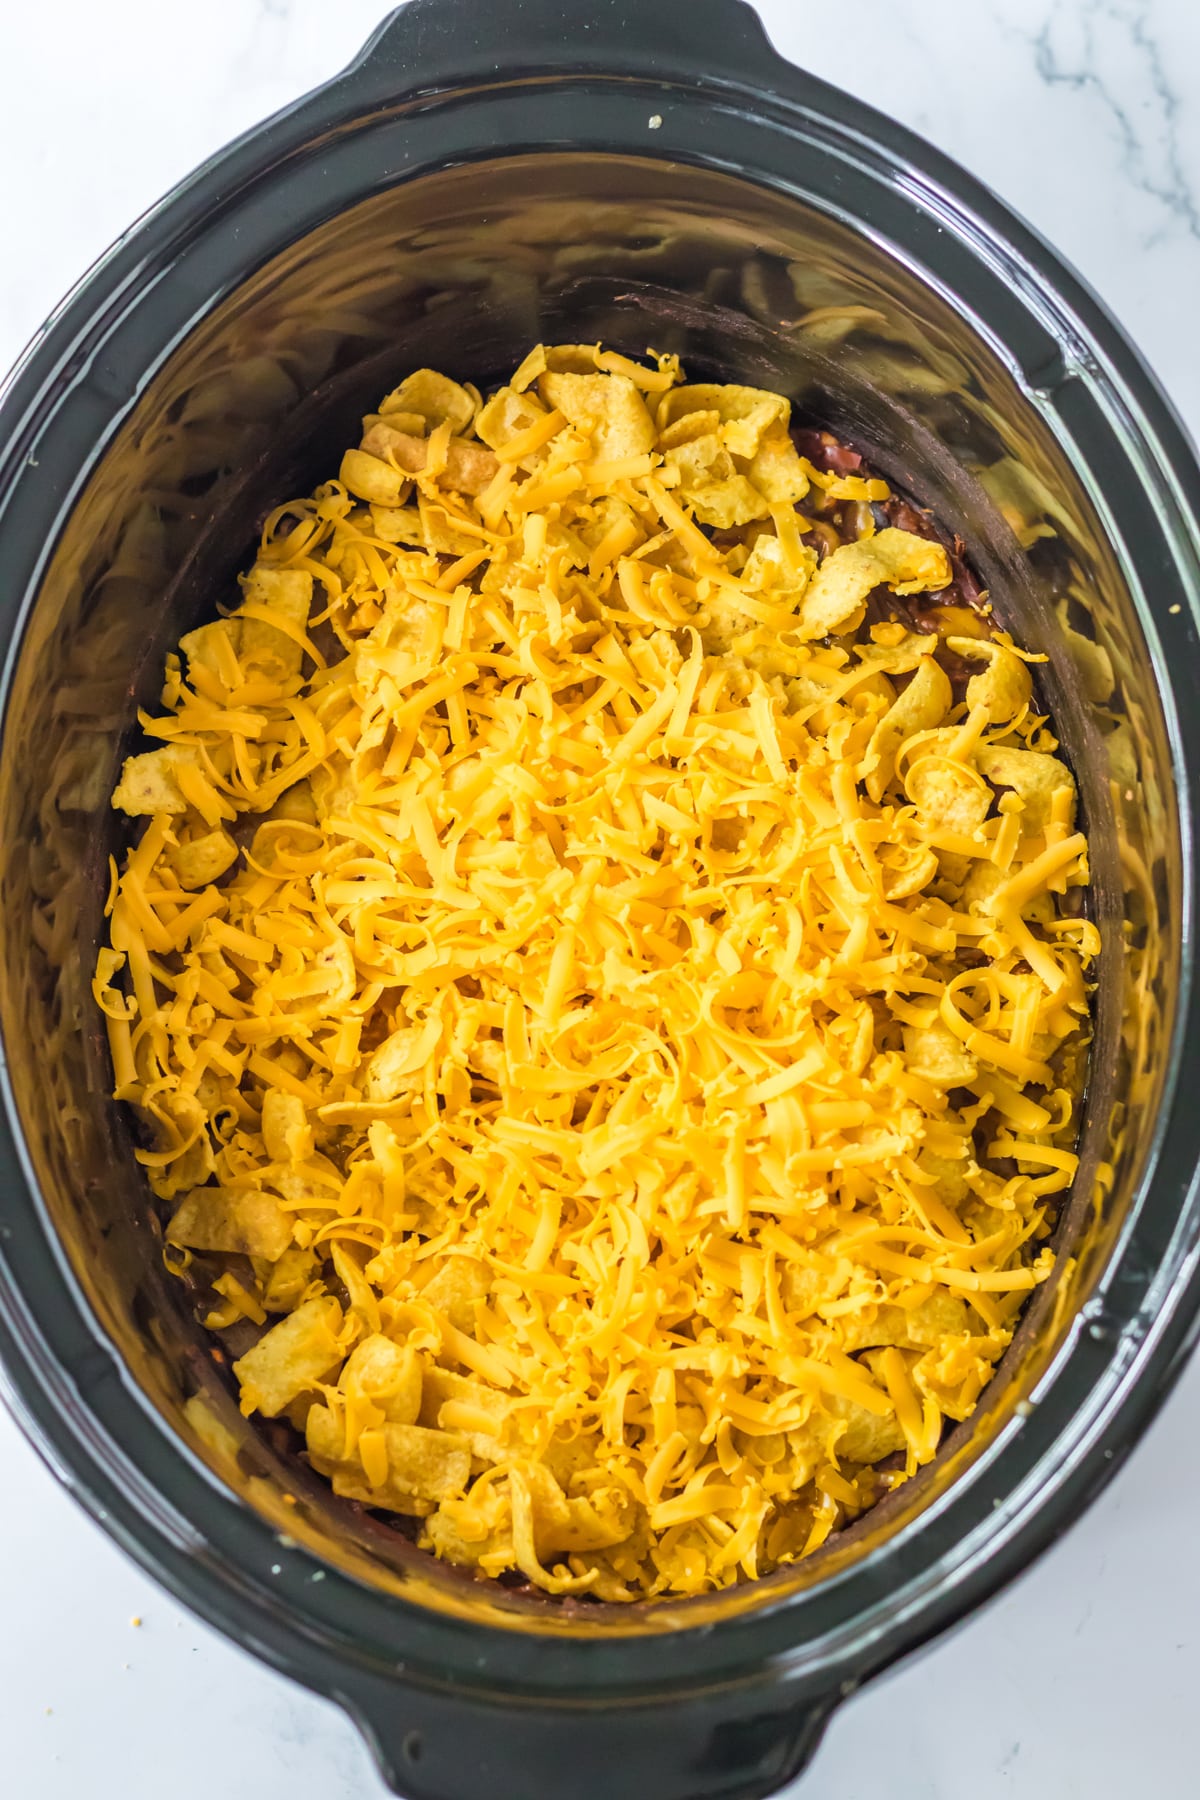 Another process in preparing Slow Cooker Frito Casserole is to add shredded cheese in a crockpot.